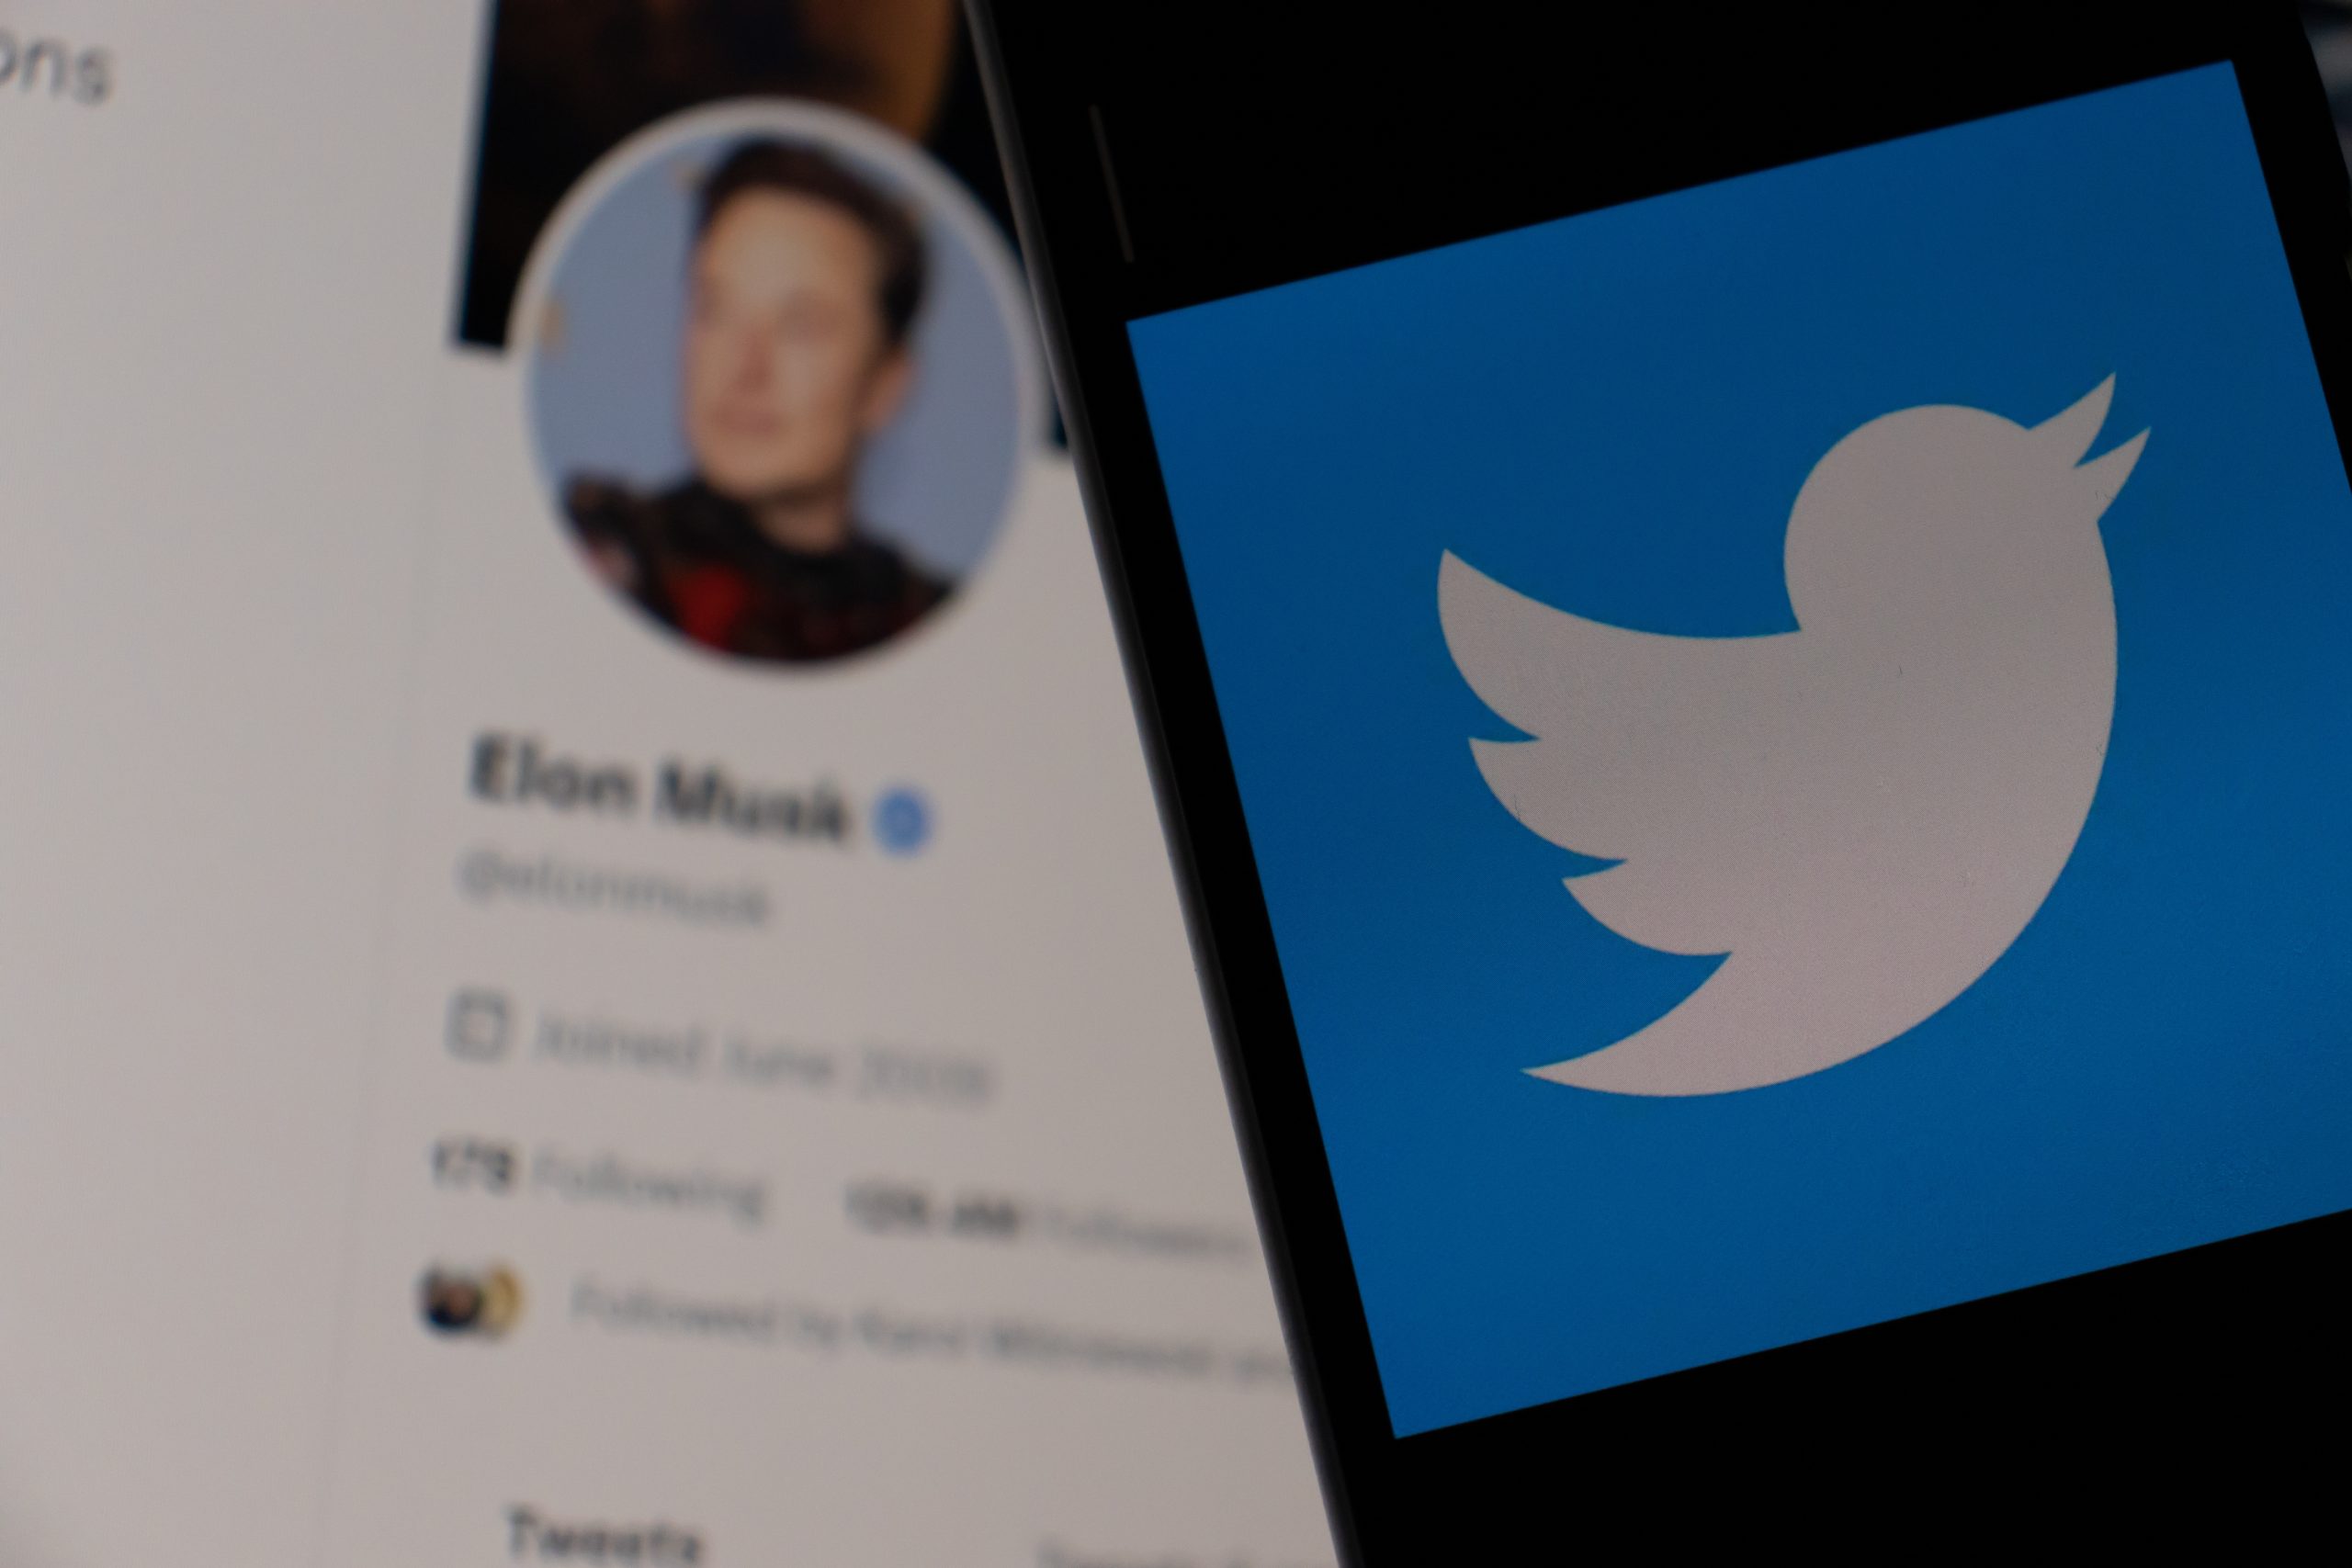 Smartphone with Twitter logo on the screen. Elon Musk on background